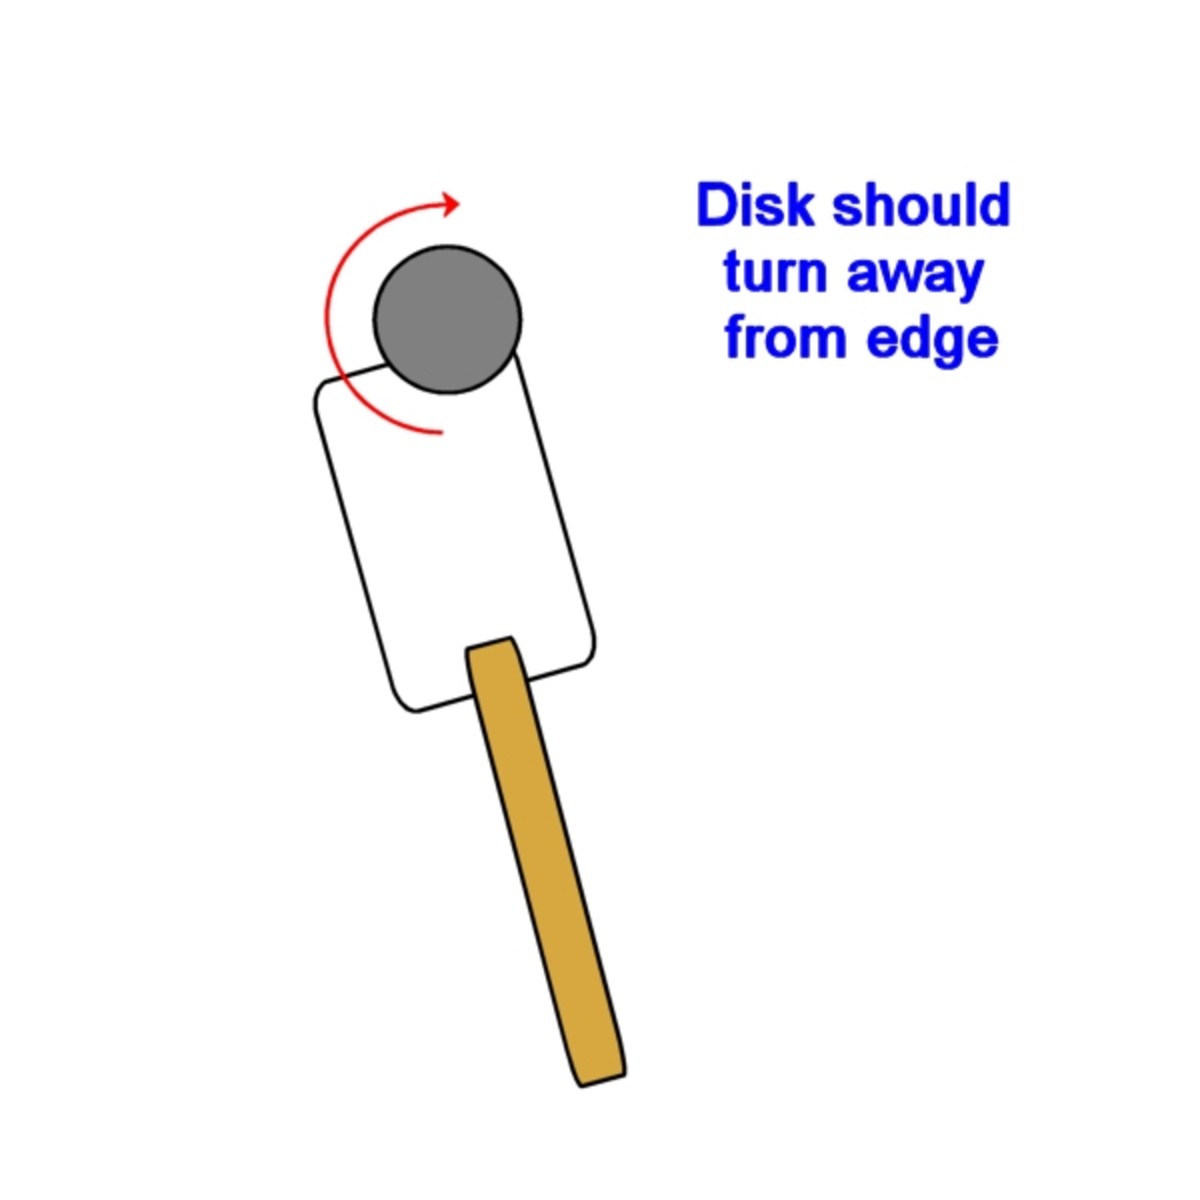 The disk should turn away from the edge